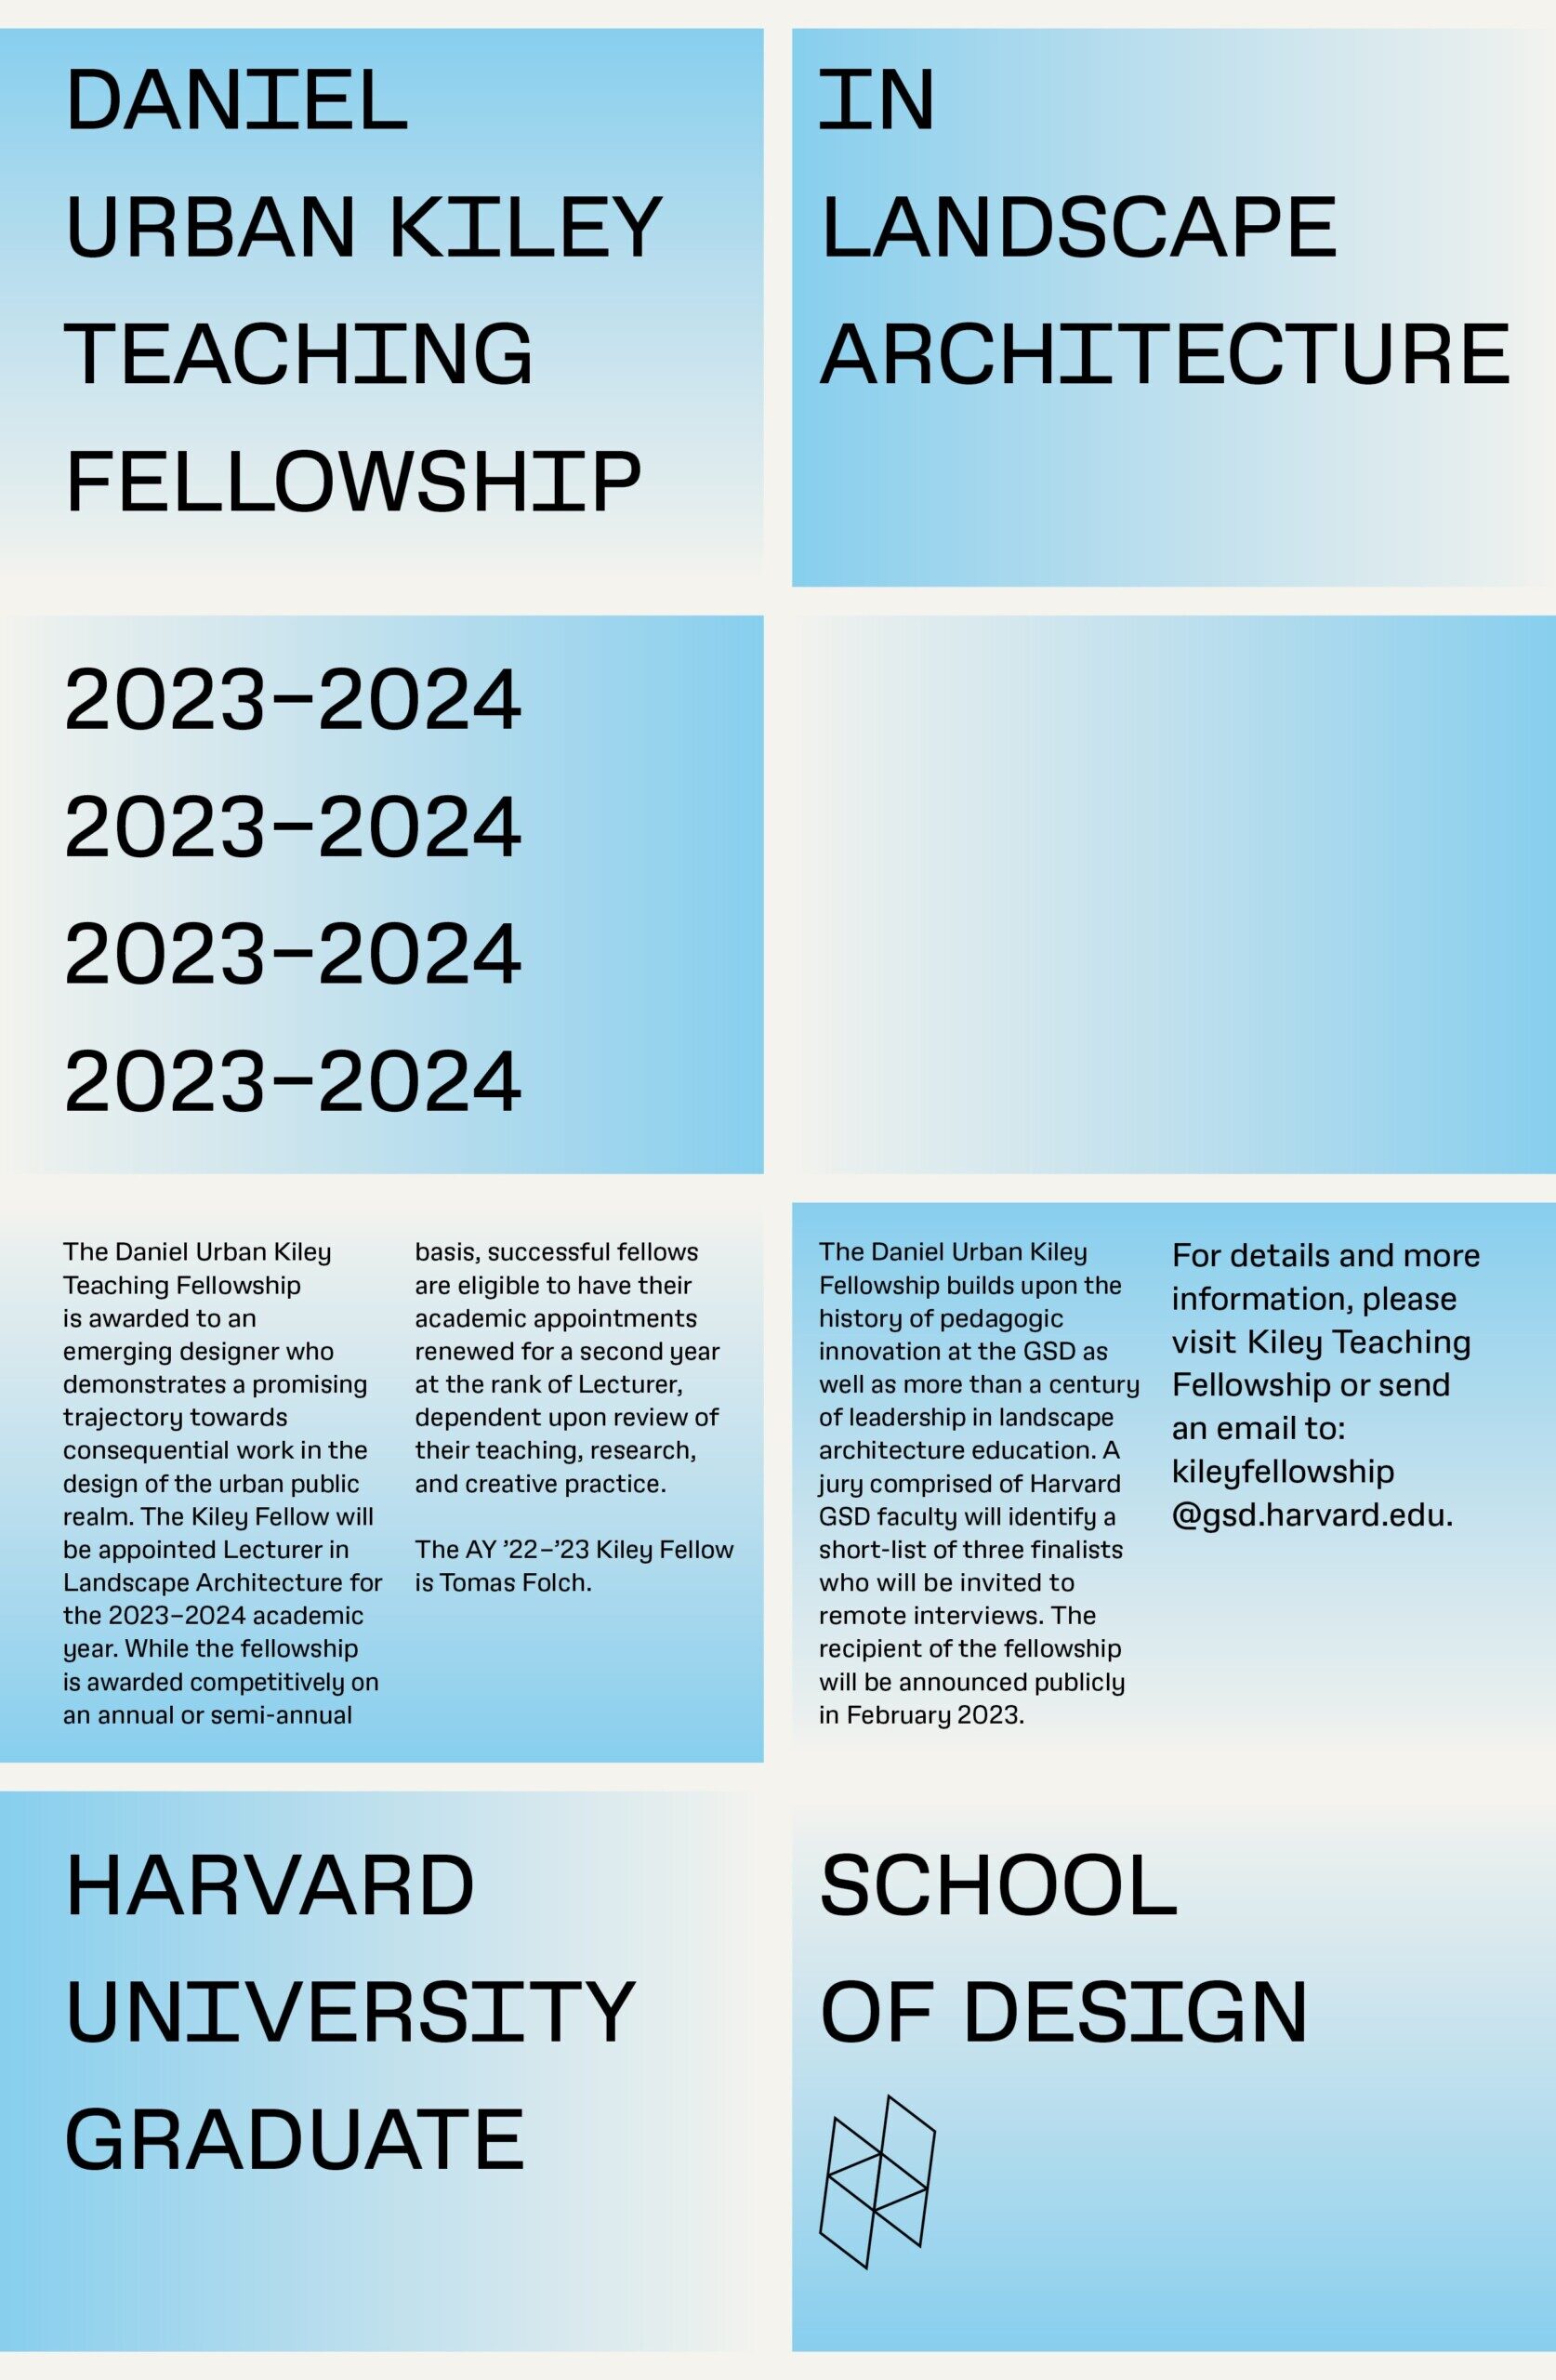 A blue and white poster promoting the Daniel Urban Kiley Fellowship 2023-2024, including information about the history of the award and the contact email kileyfellowship@gsd.harvard.edu.